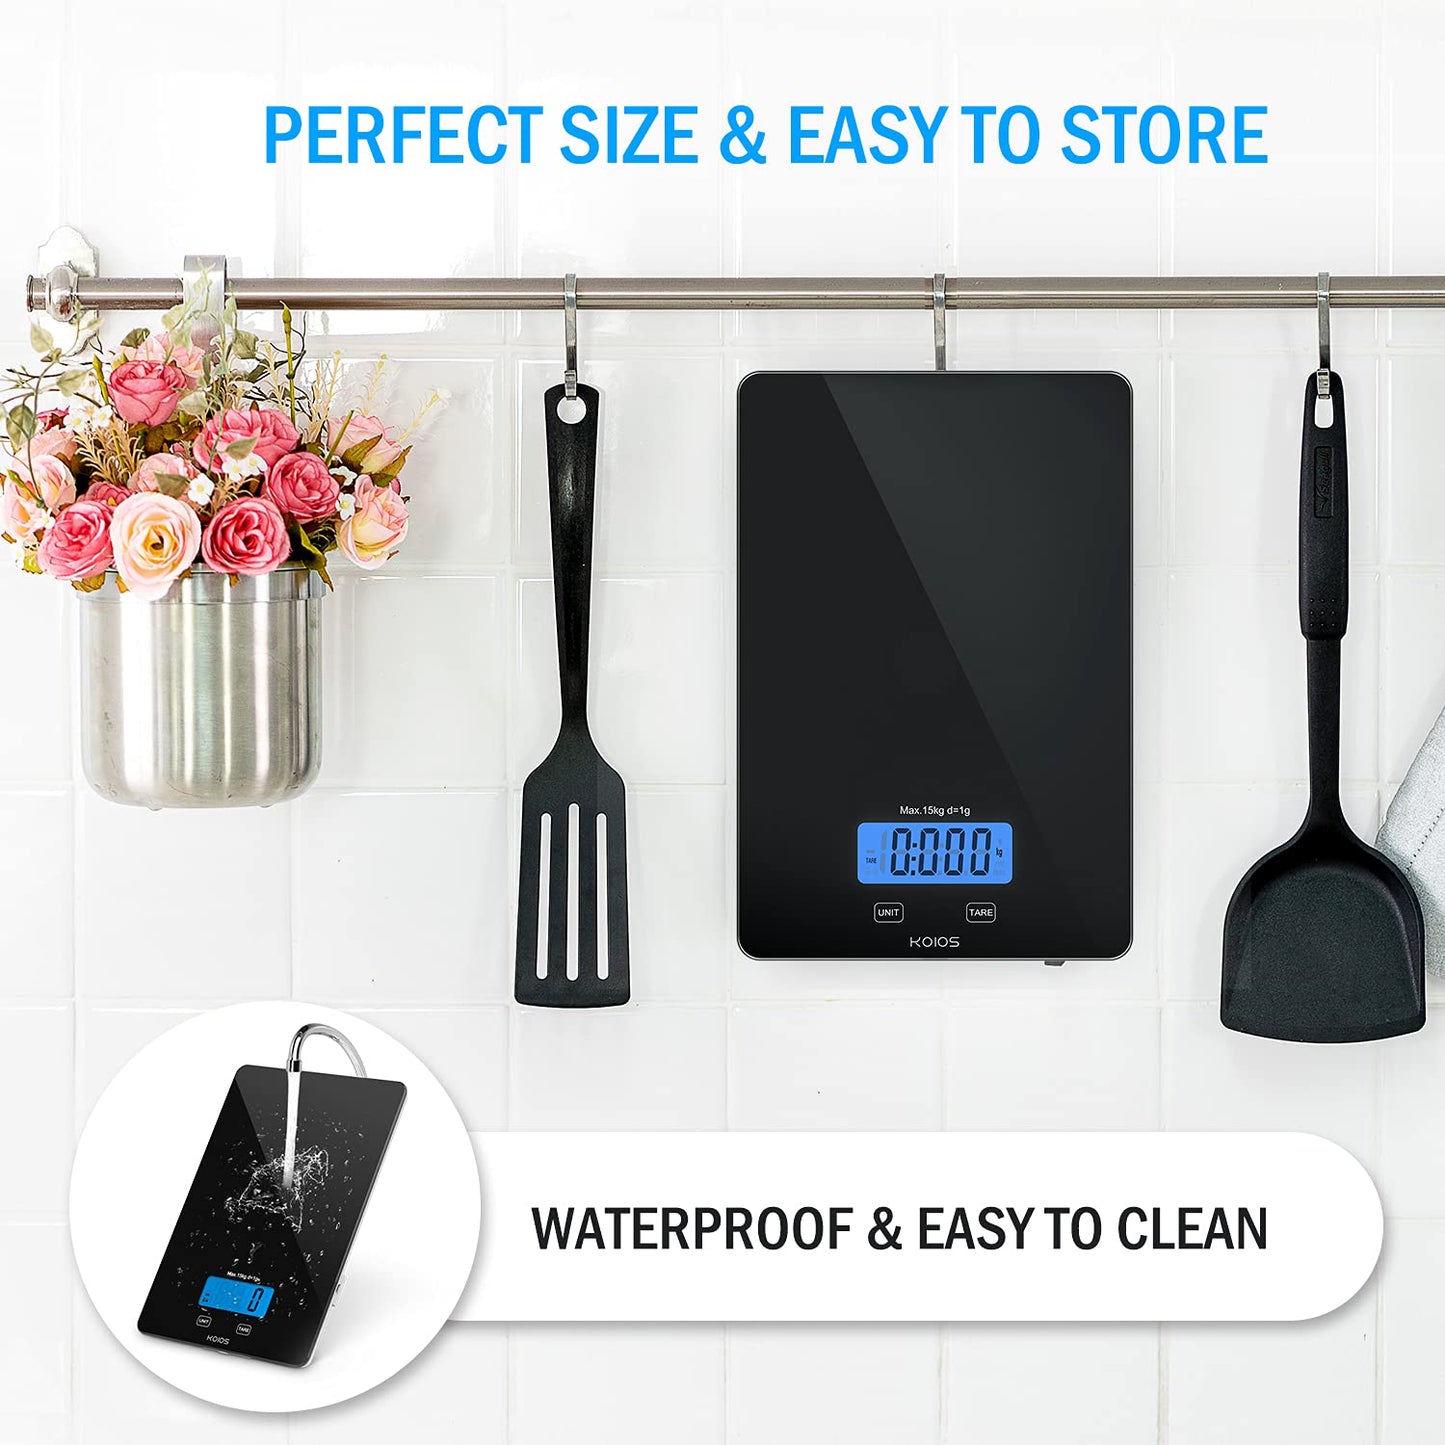 KOIOS 33lb Digital Kitchen Scale, USB Rechargeable, Waterproof Glass